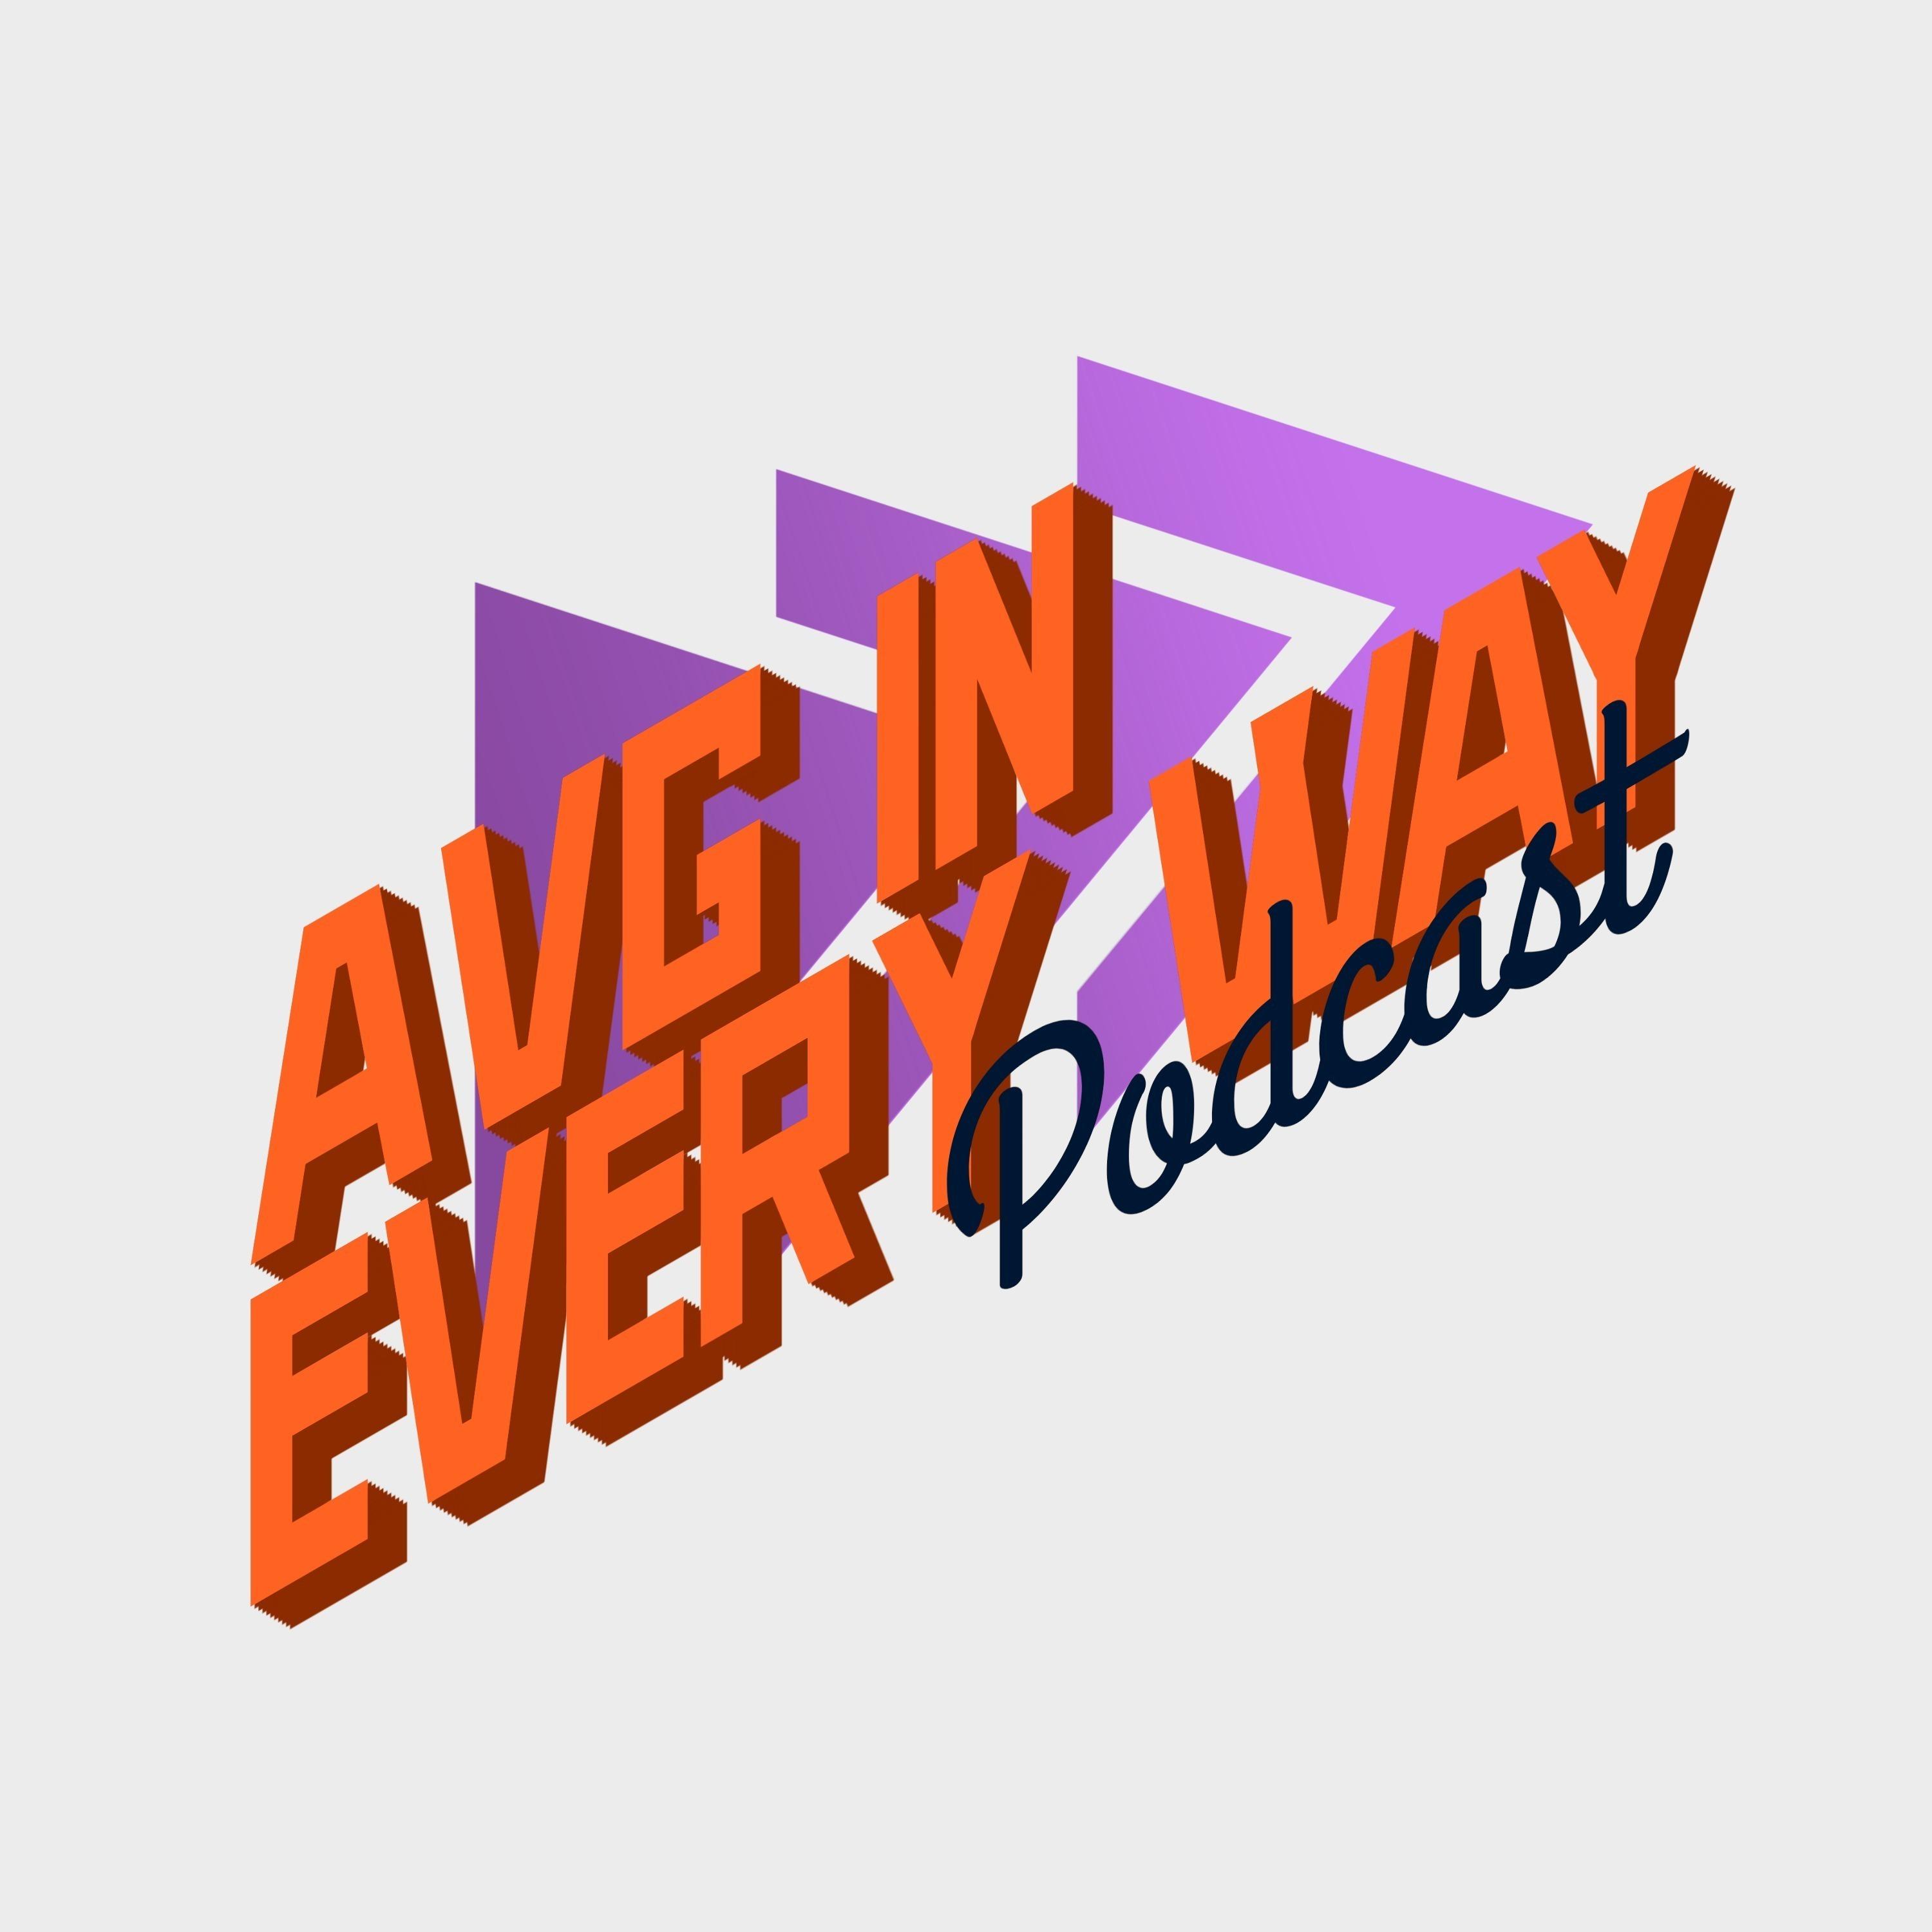 Avg In Every Way Podcast